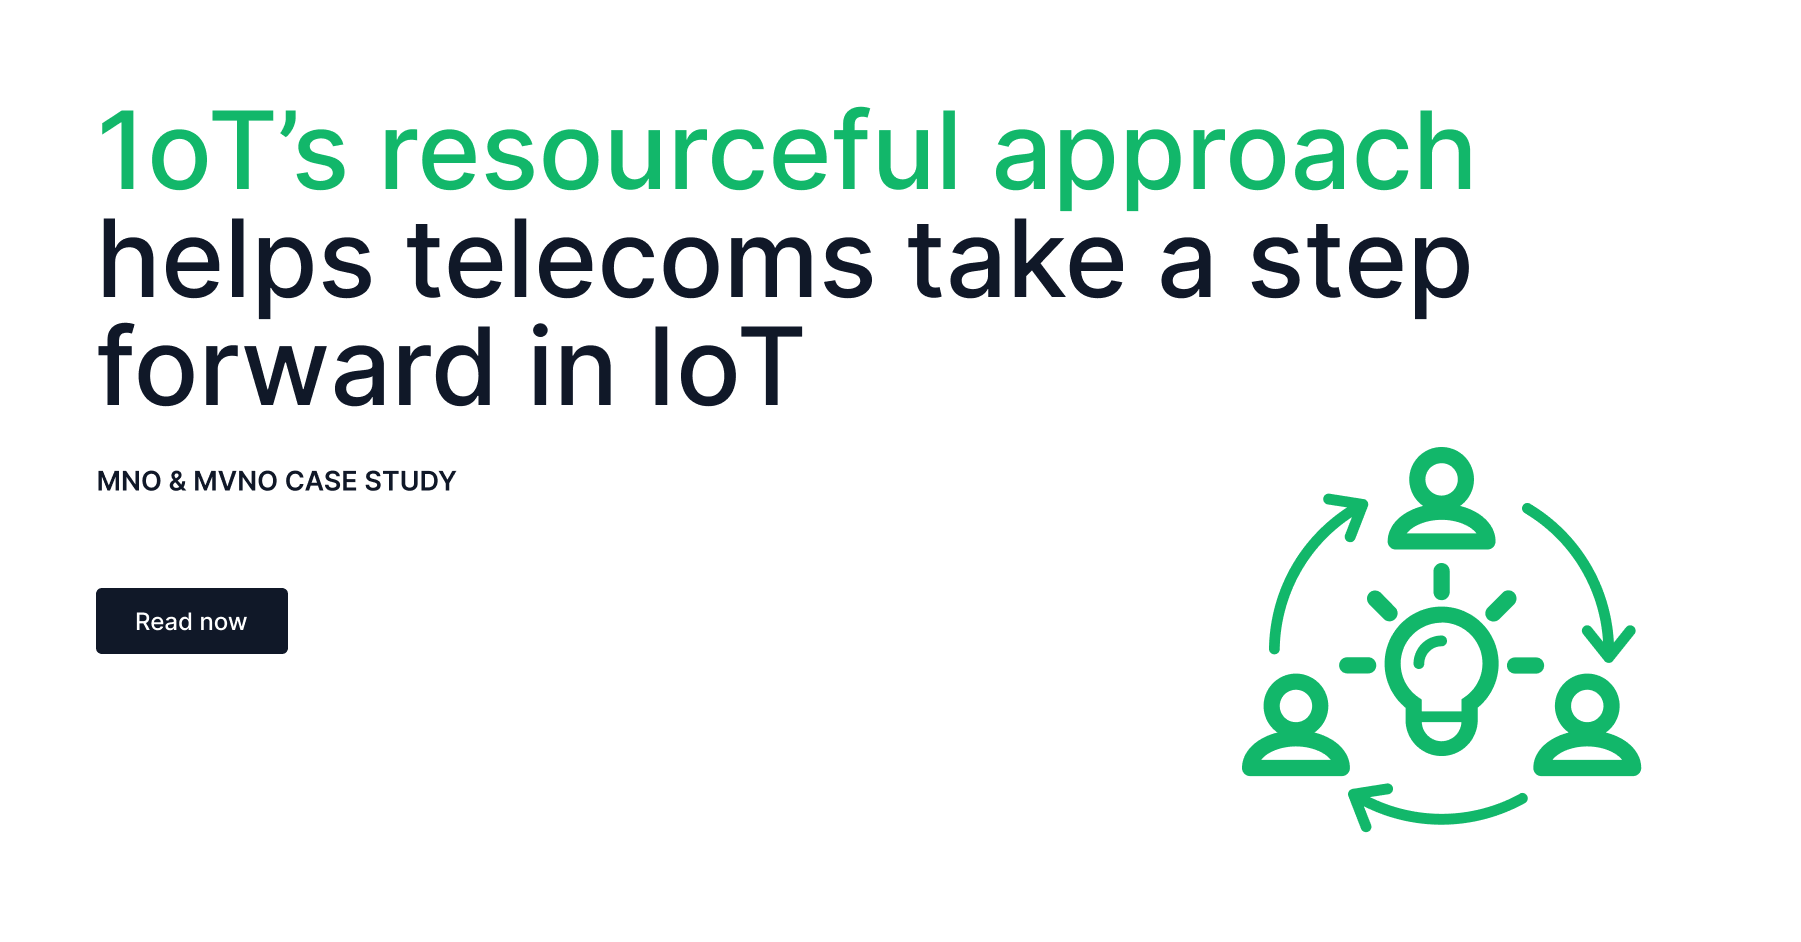 Article cover image for 1oT's resourceful approach helps telecoms take a step forward in IoT